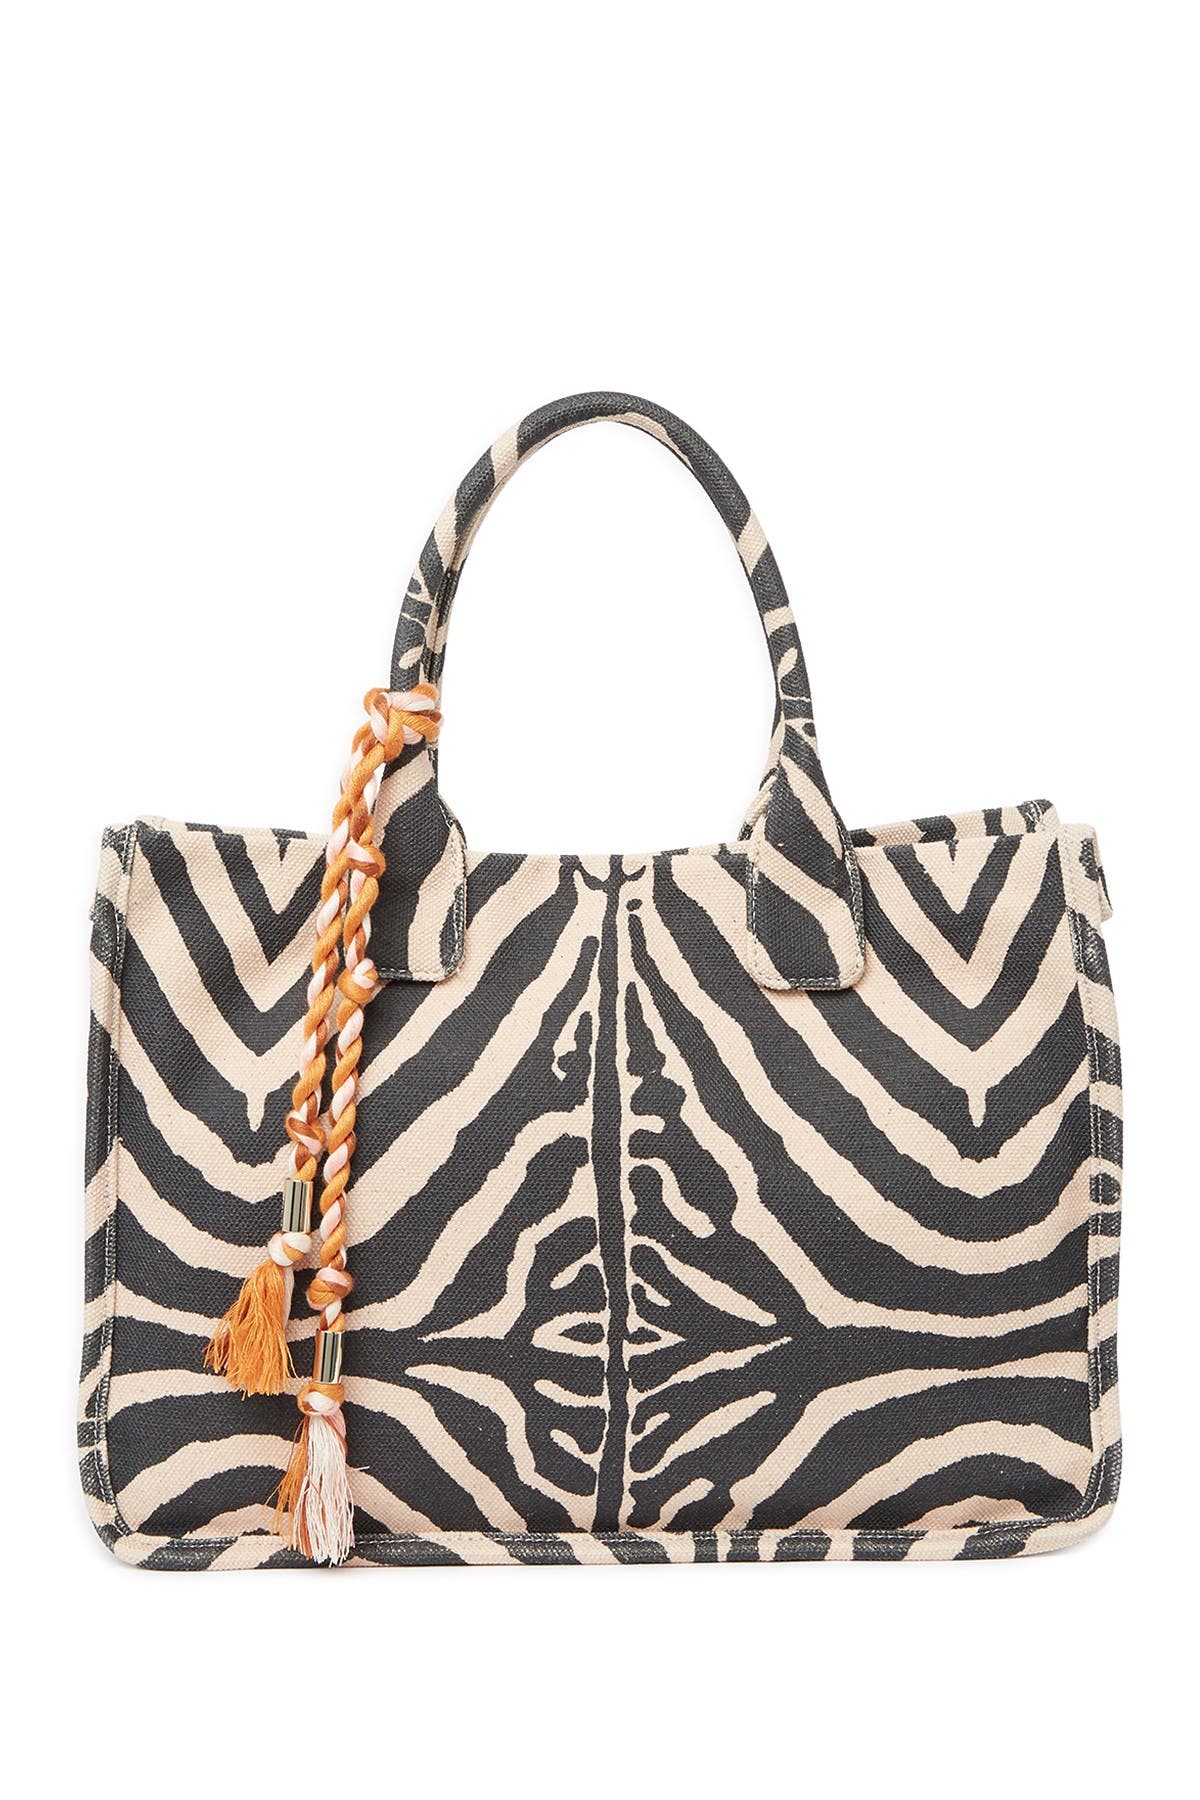 Vince Camuto Orla Printed Tote Bag In Taupe 01